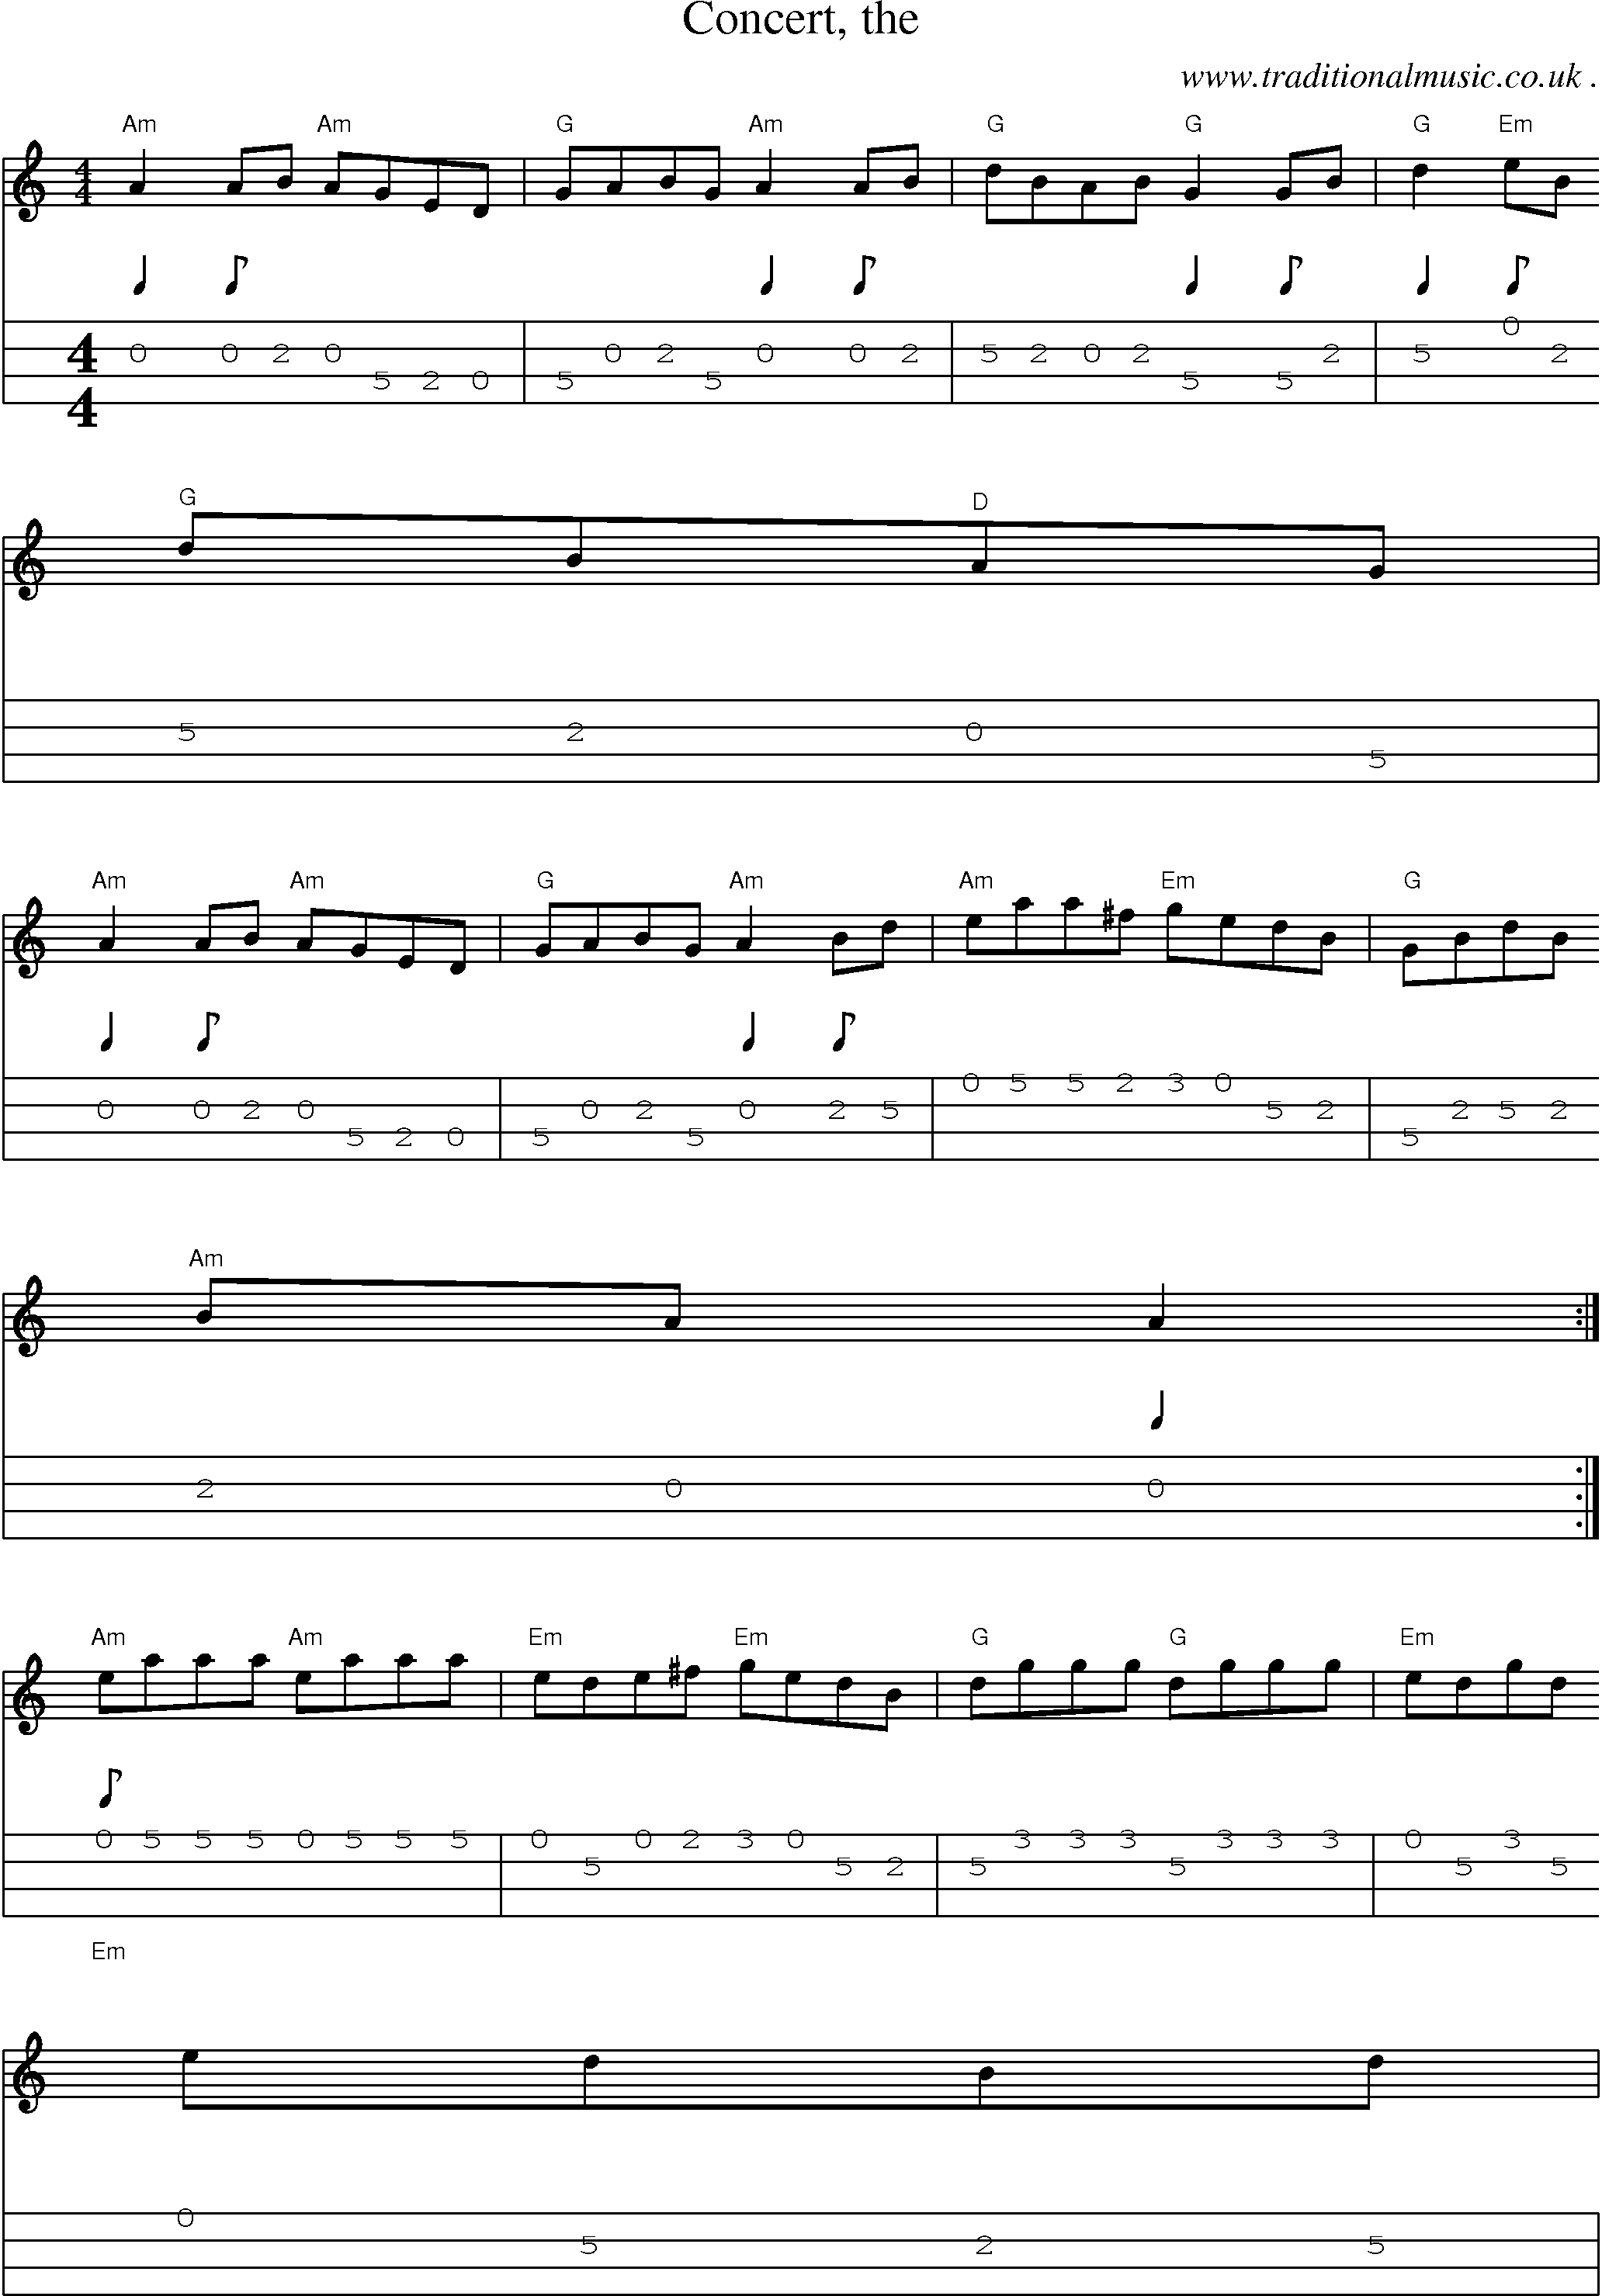 Music Score and Guitar Tabs for Concert The